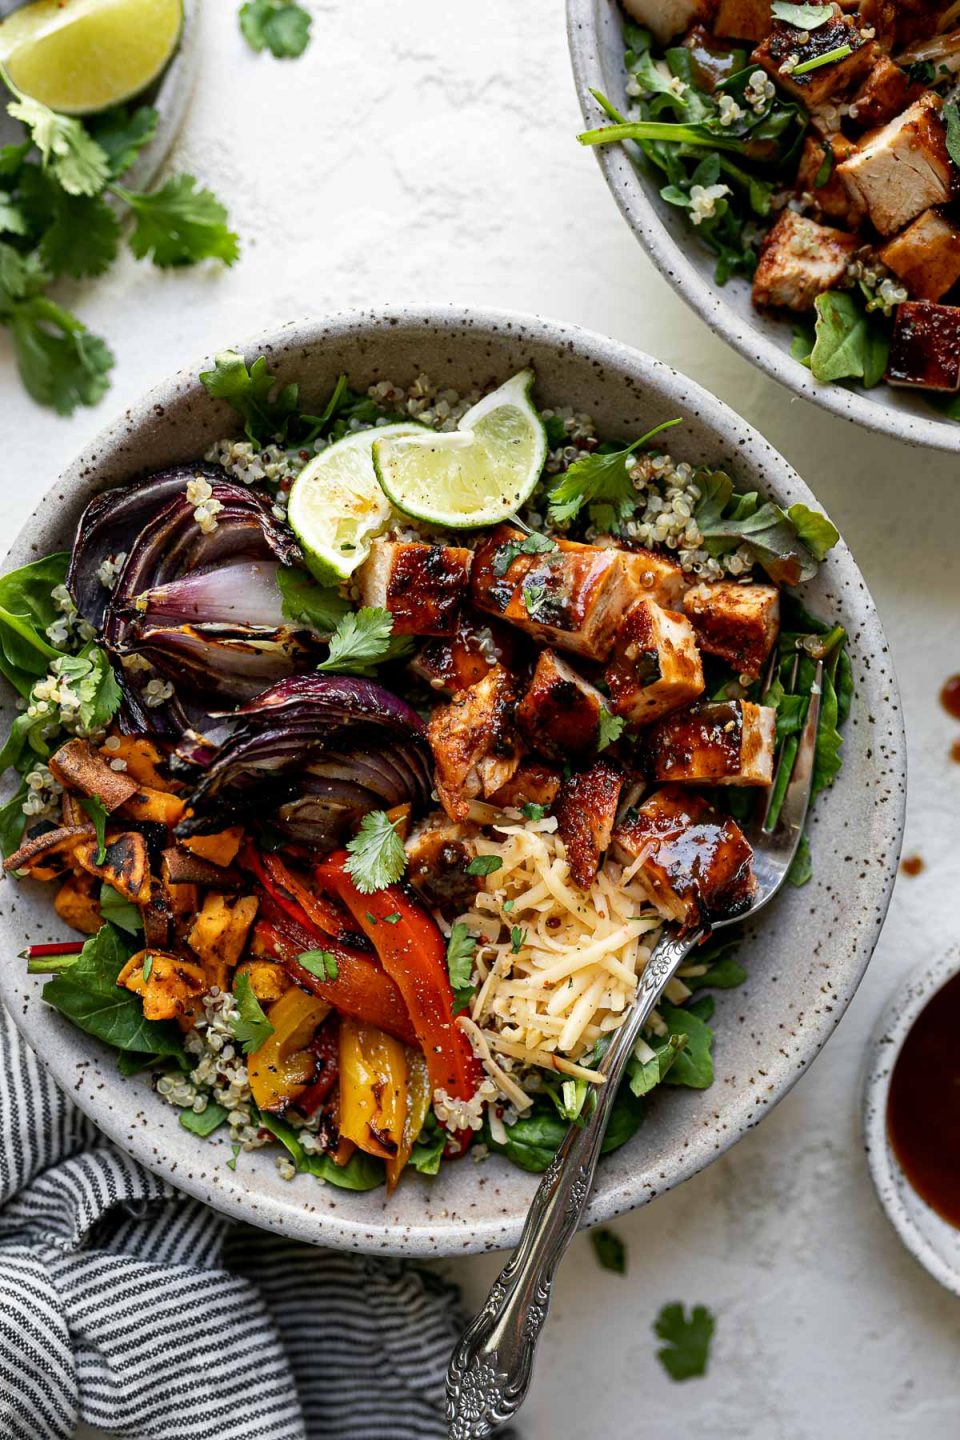 Grilled BBQ chicken bowl with diced BBQ chicken, grilled onions, sweet potatoes & bell peppers sitting atop a bed of greens & quinoa in a large speckled gray bowl. The bowl sits atop a white surface, surrounded by a striped gray linen napkin, a second BBQ chicken rice bowl, extra BBQ sauce, cilantro leaves & lime wedges.